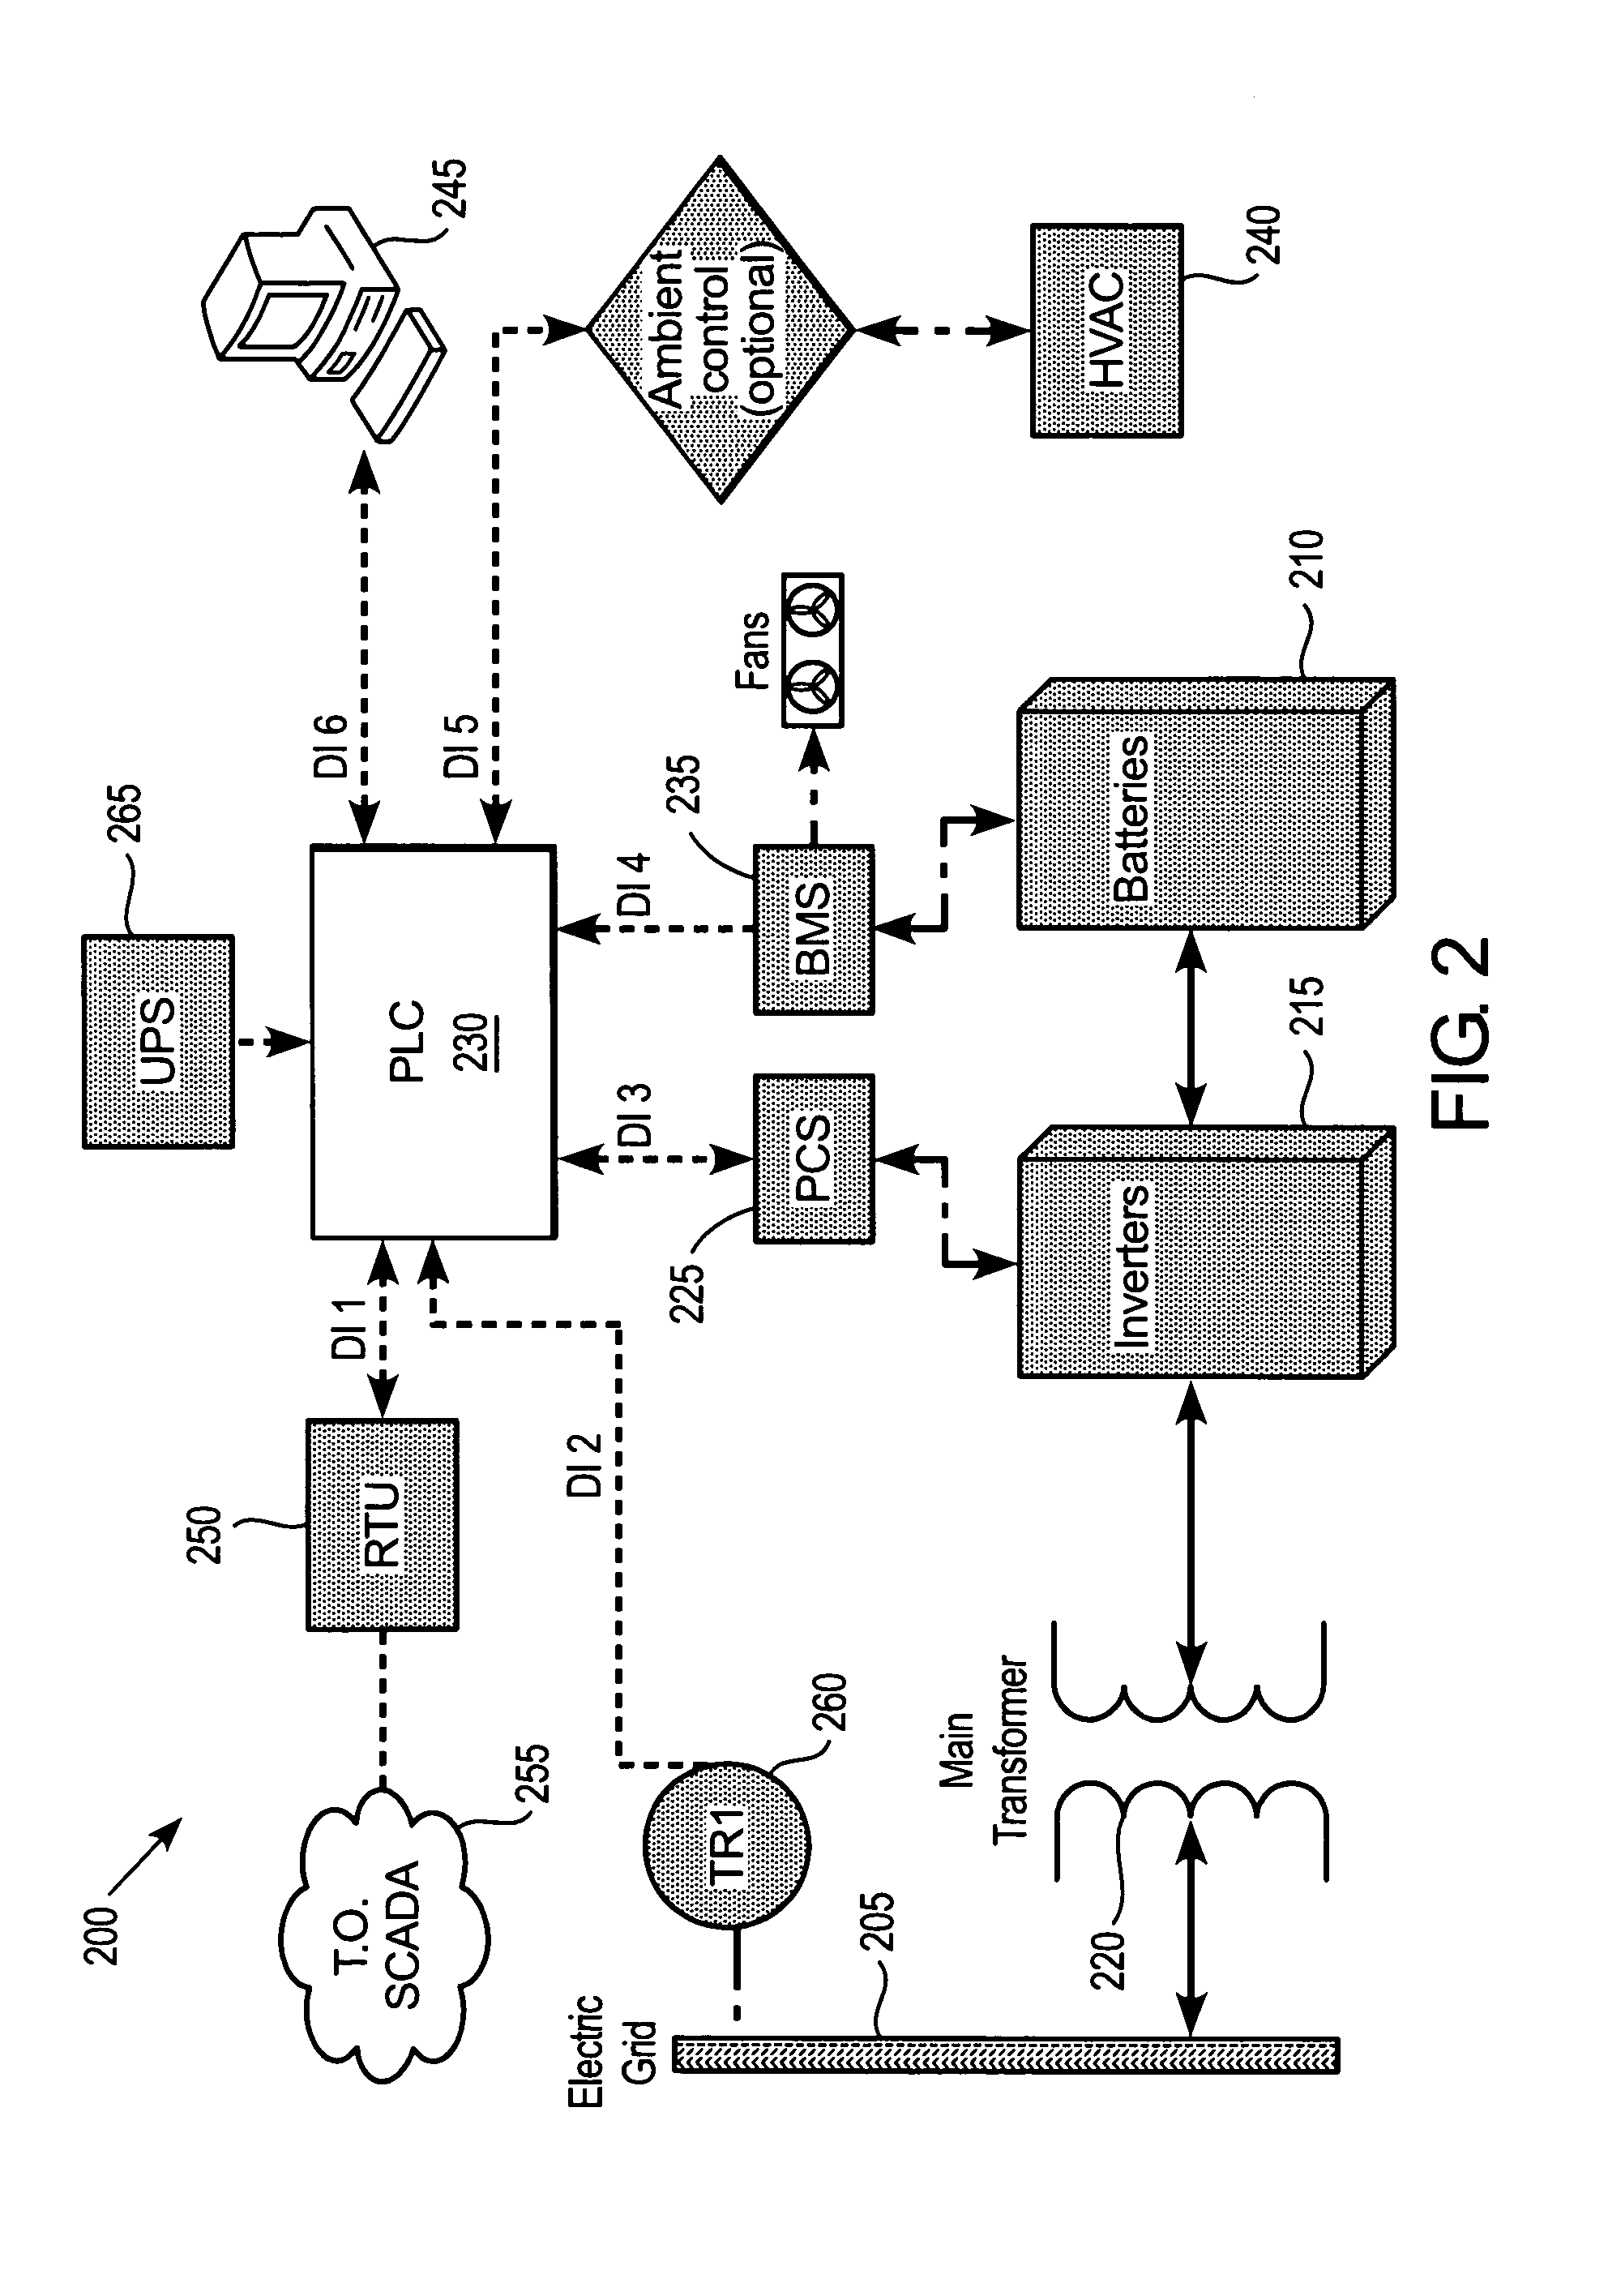 Frequency responsive charge sustaining control of electricity storage systems for ancillary services on an electrical power grid